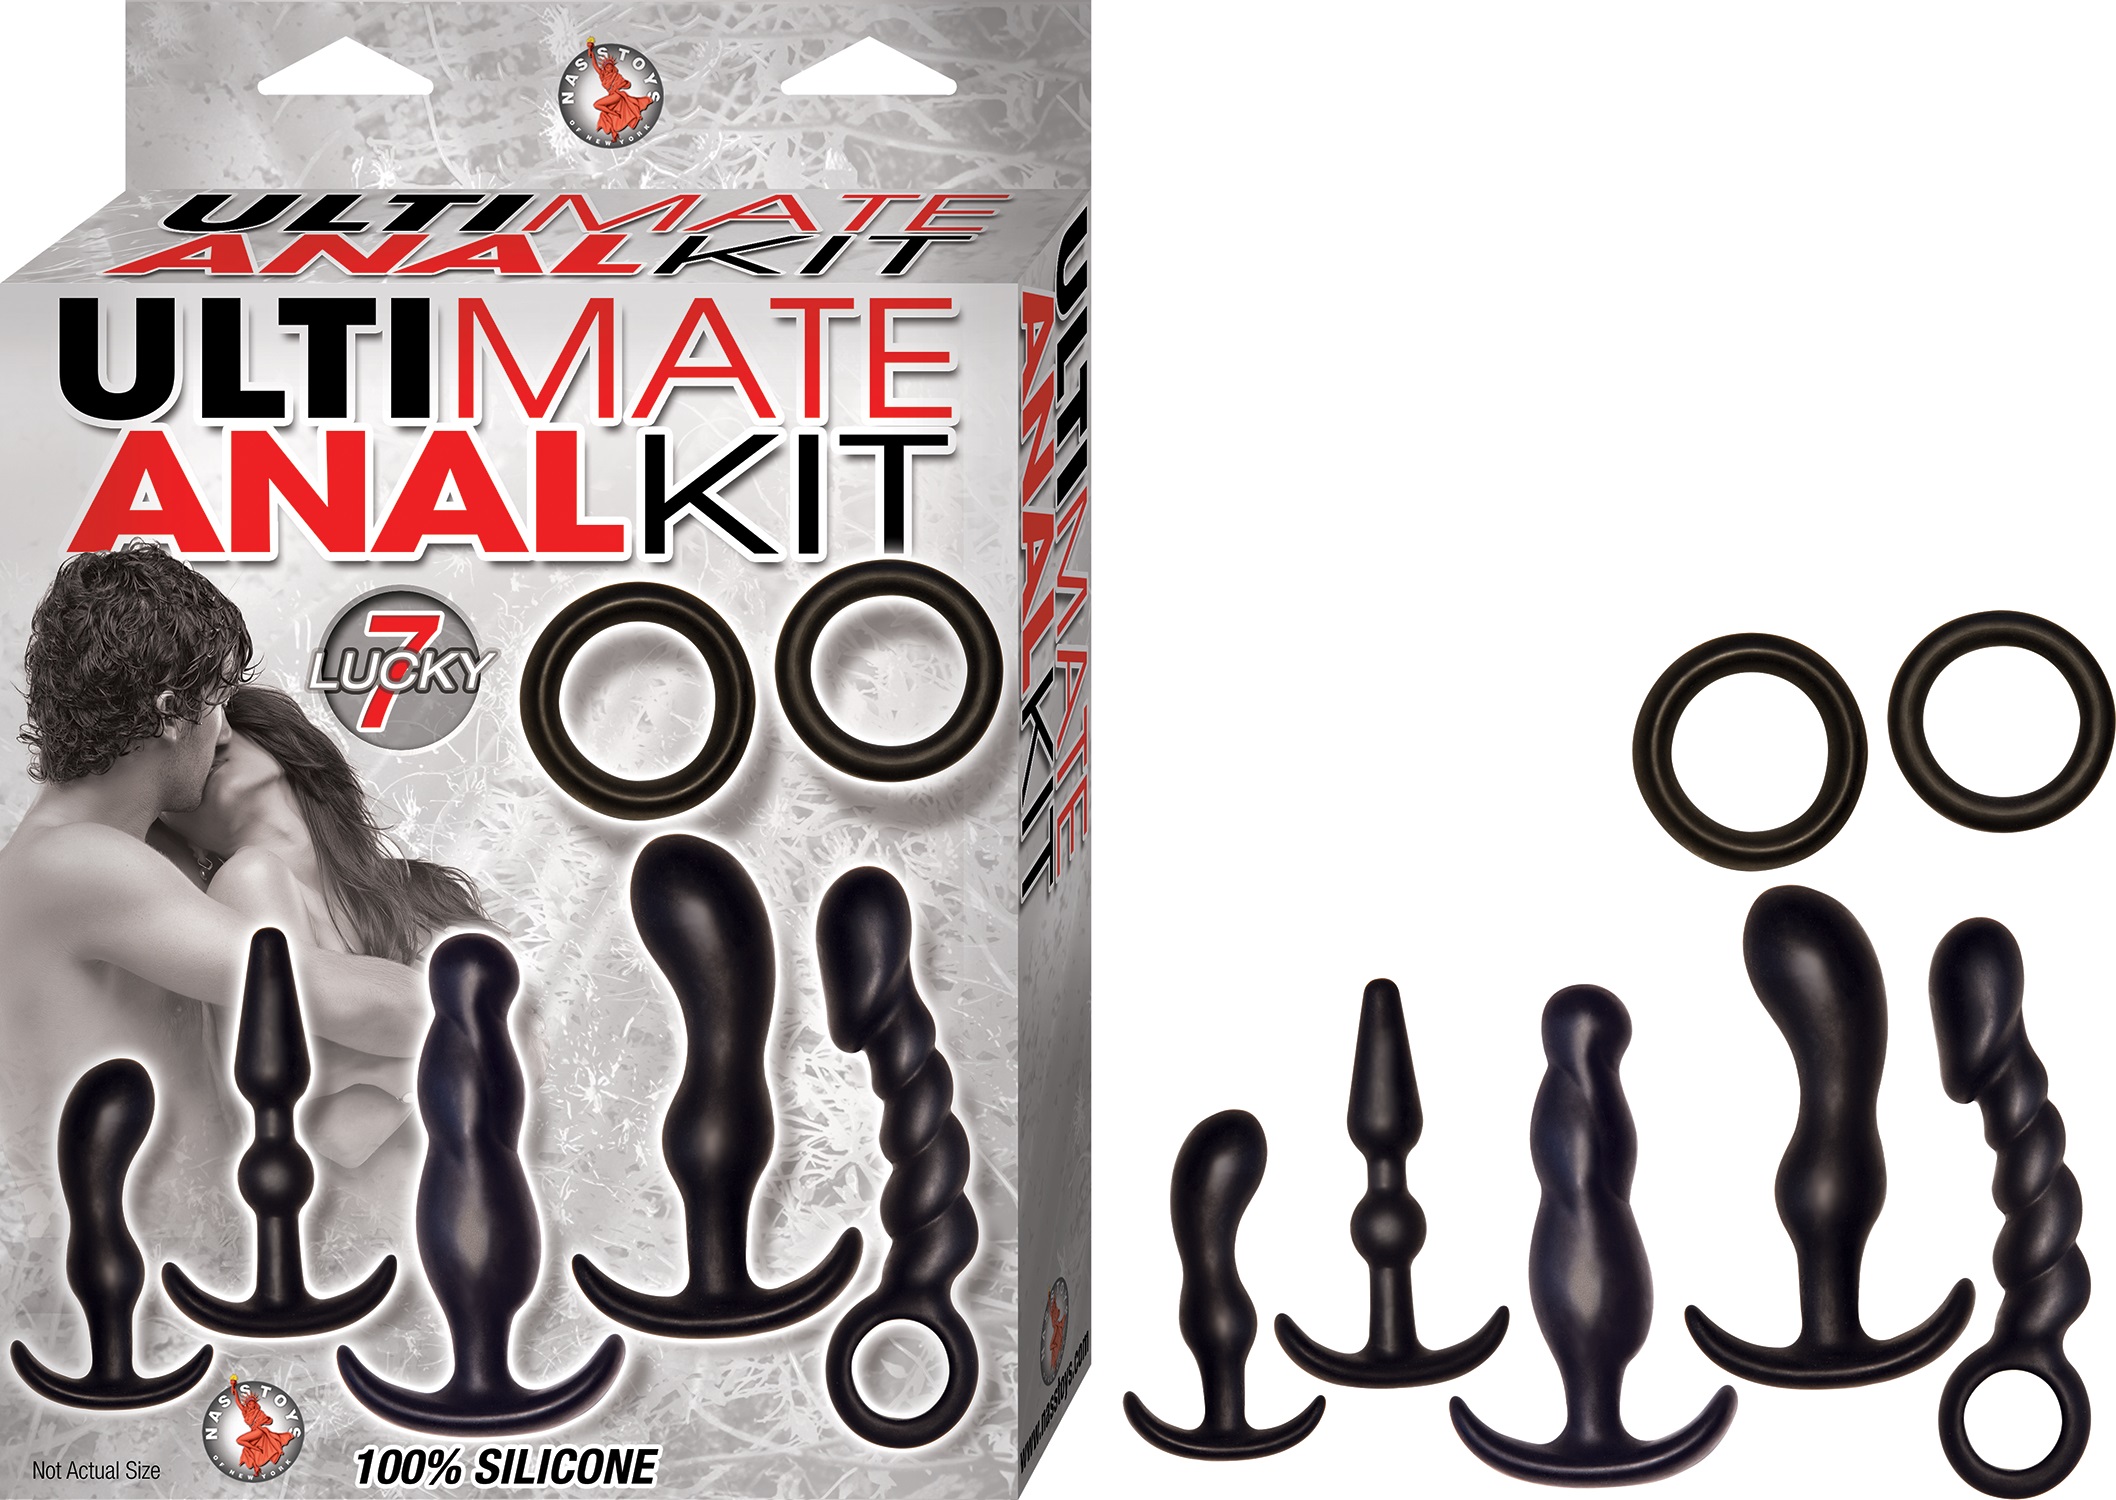 Ultimate+Anal+Kit+Silicone+Waterproof+7+Piece+Kit